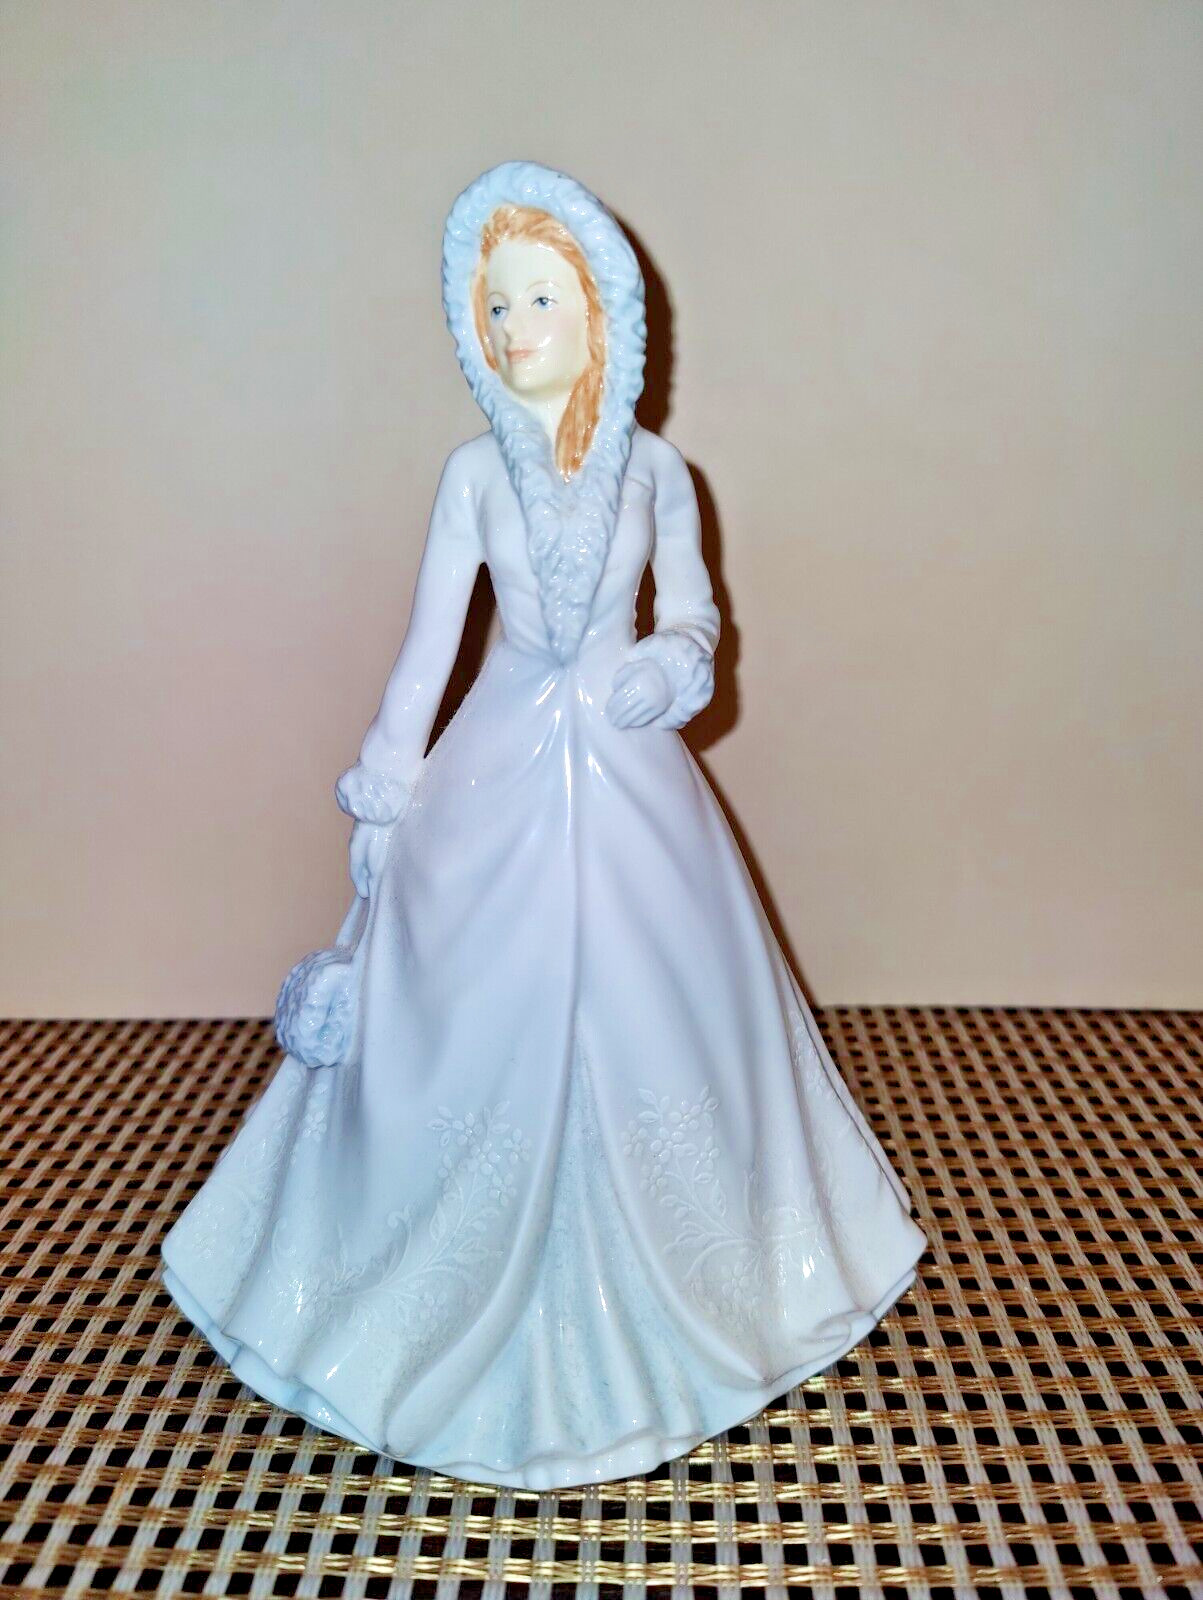 Royal Doulton Figurine Songs of Christmas White Christmas - Excellent Condition